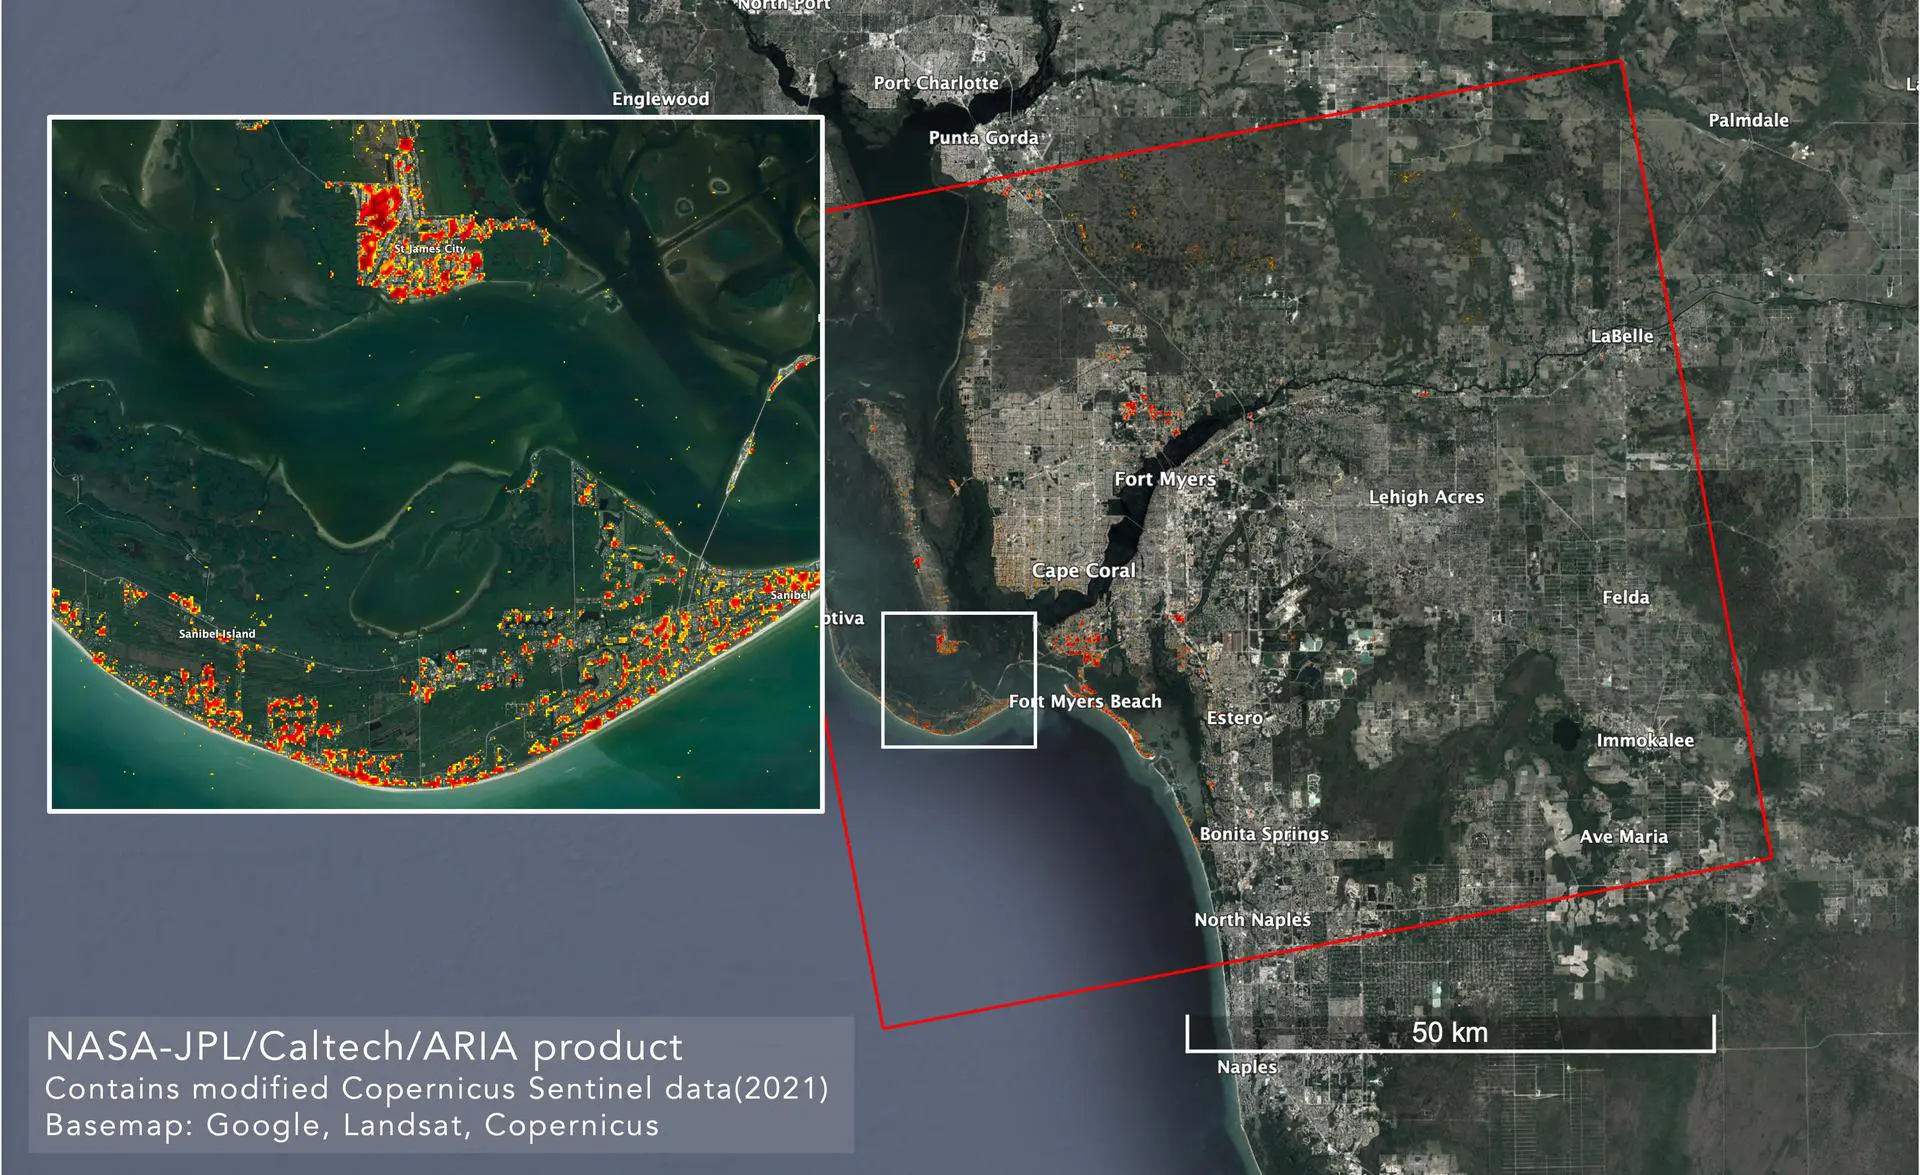 NASA Advanced Rapid Imaging and Analysis (ARIA) Maps Damage in Fort Myers From Hurricane Ian